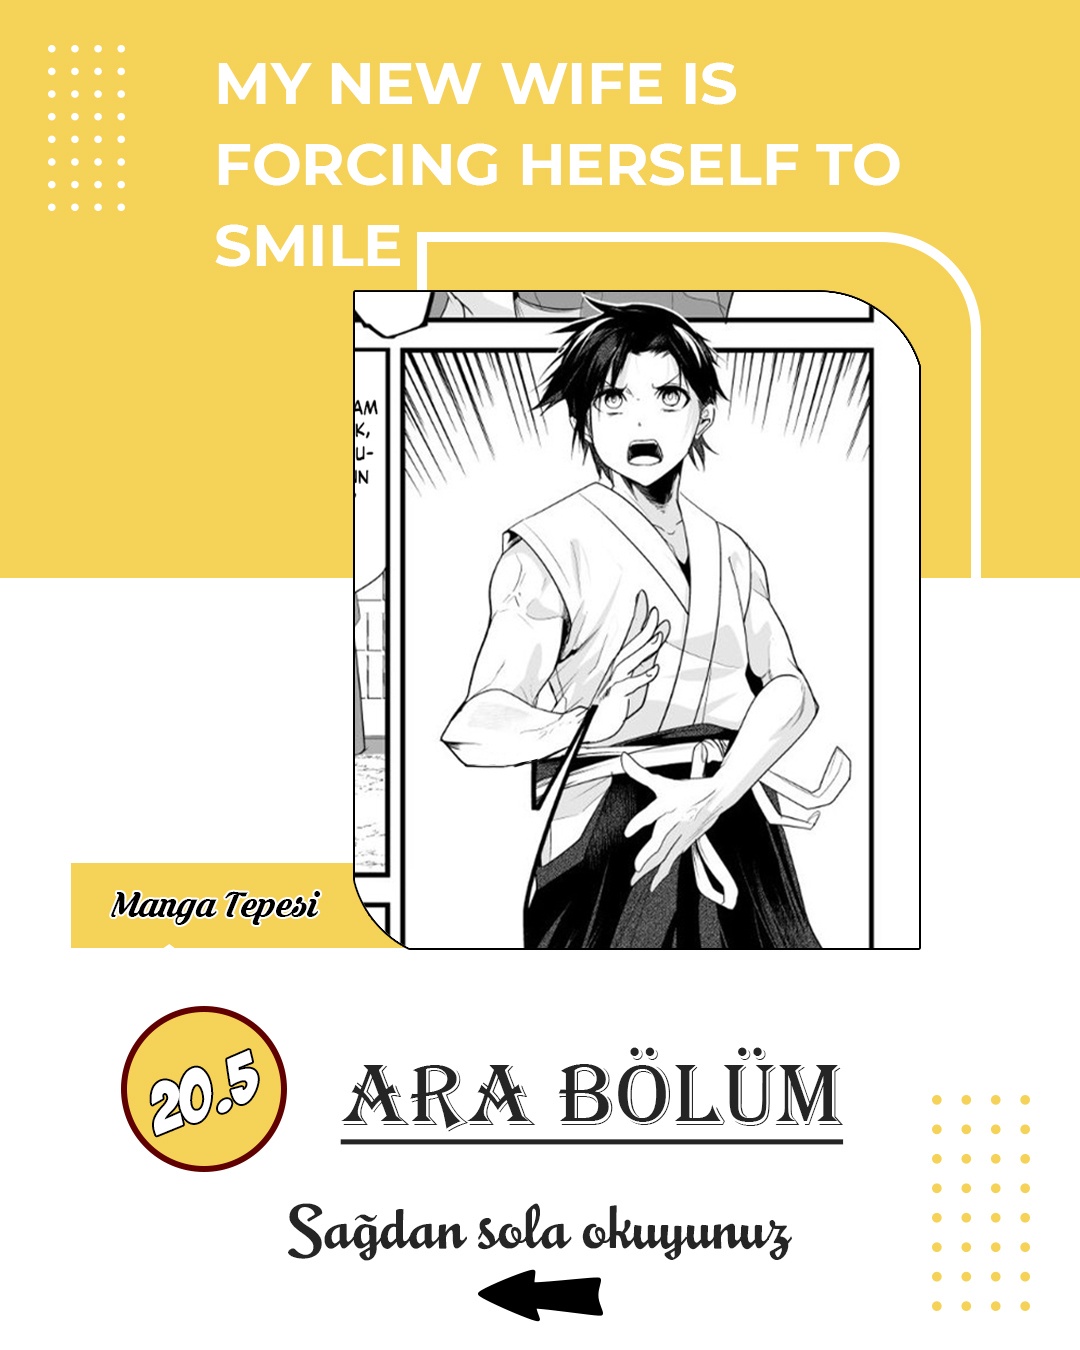 my-new-wife-is-forcing-herself-to-smile20-5-bolum